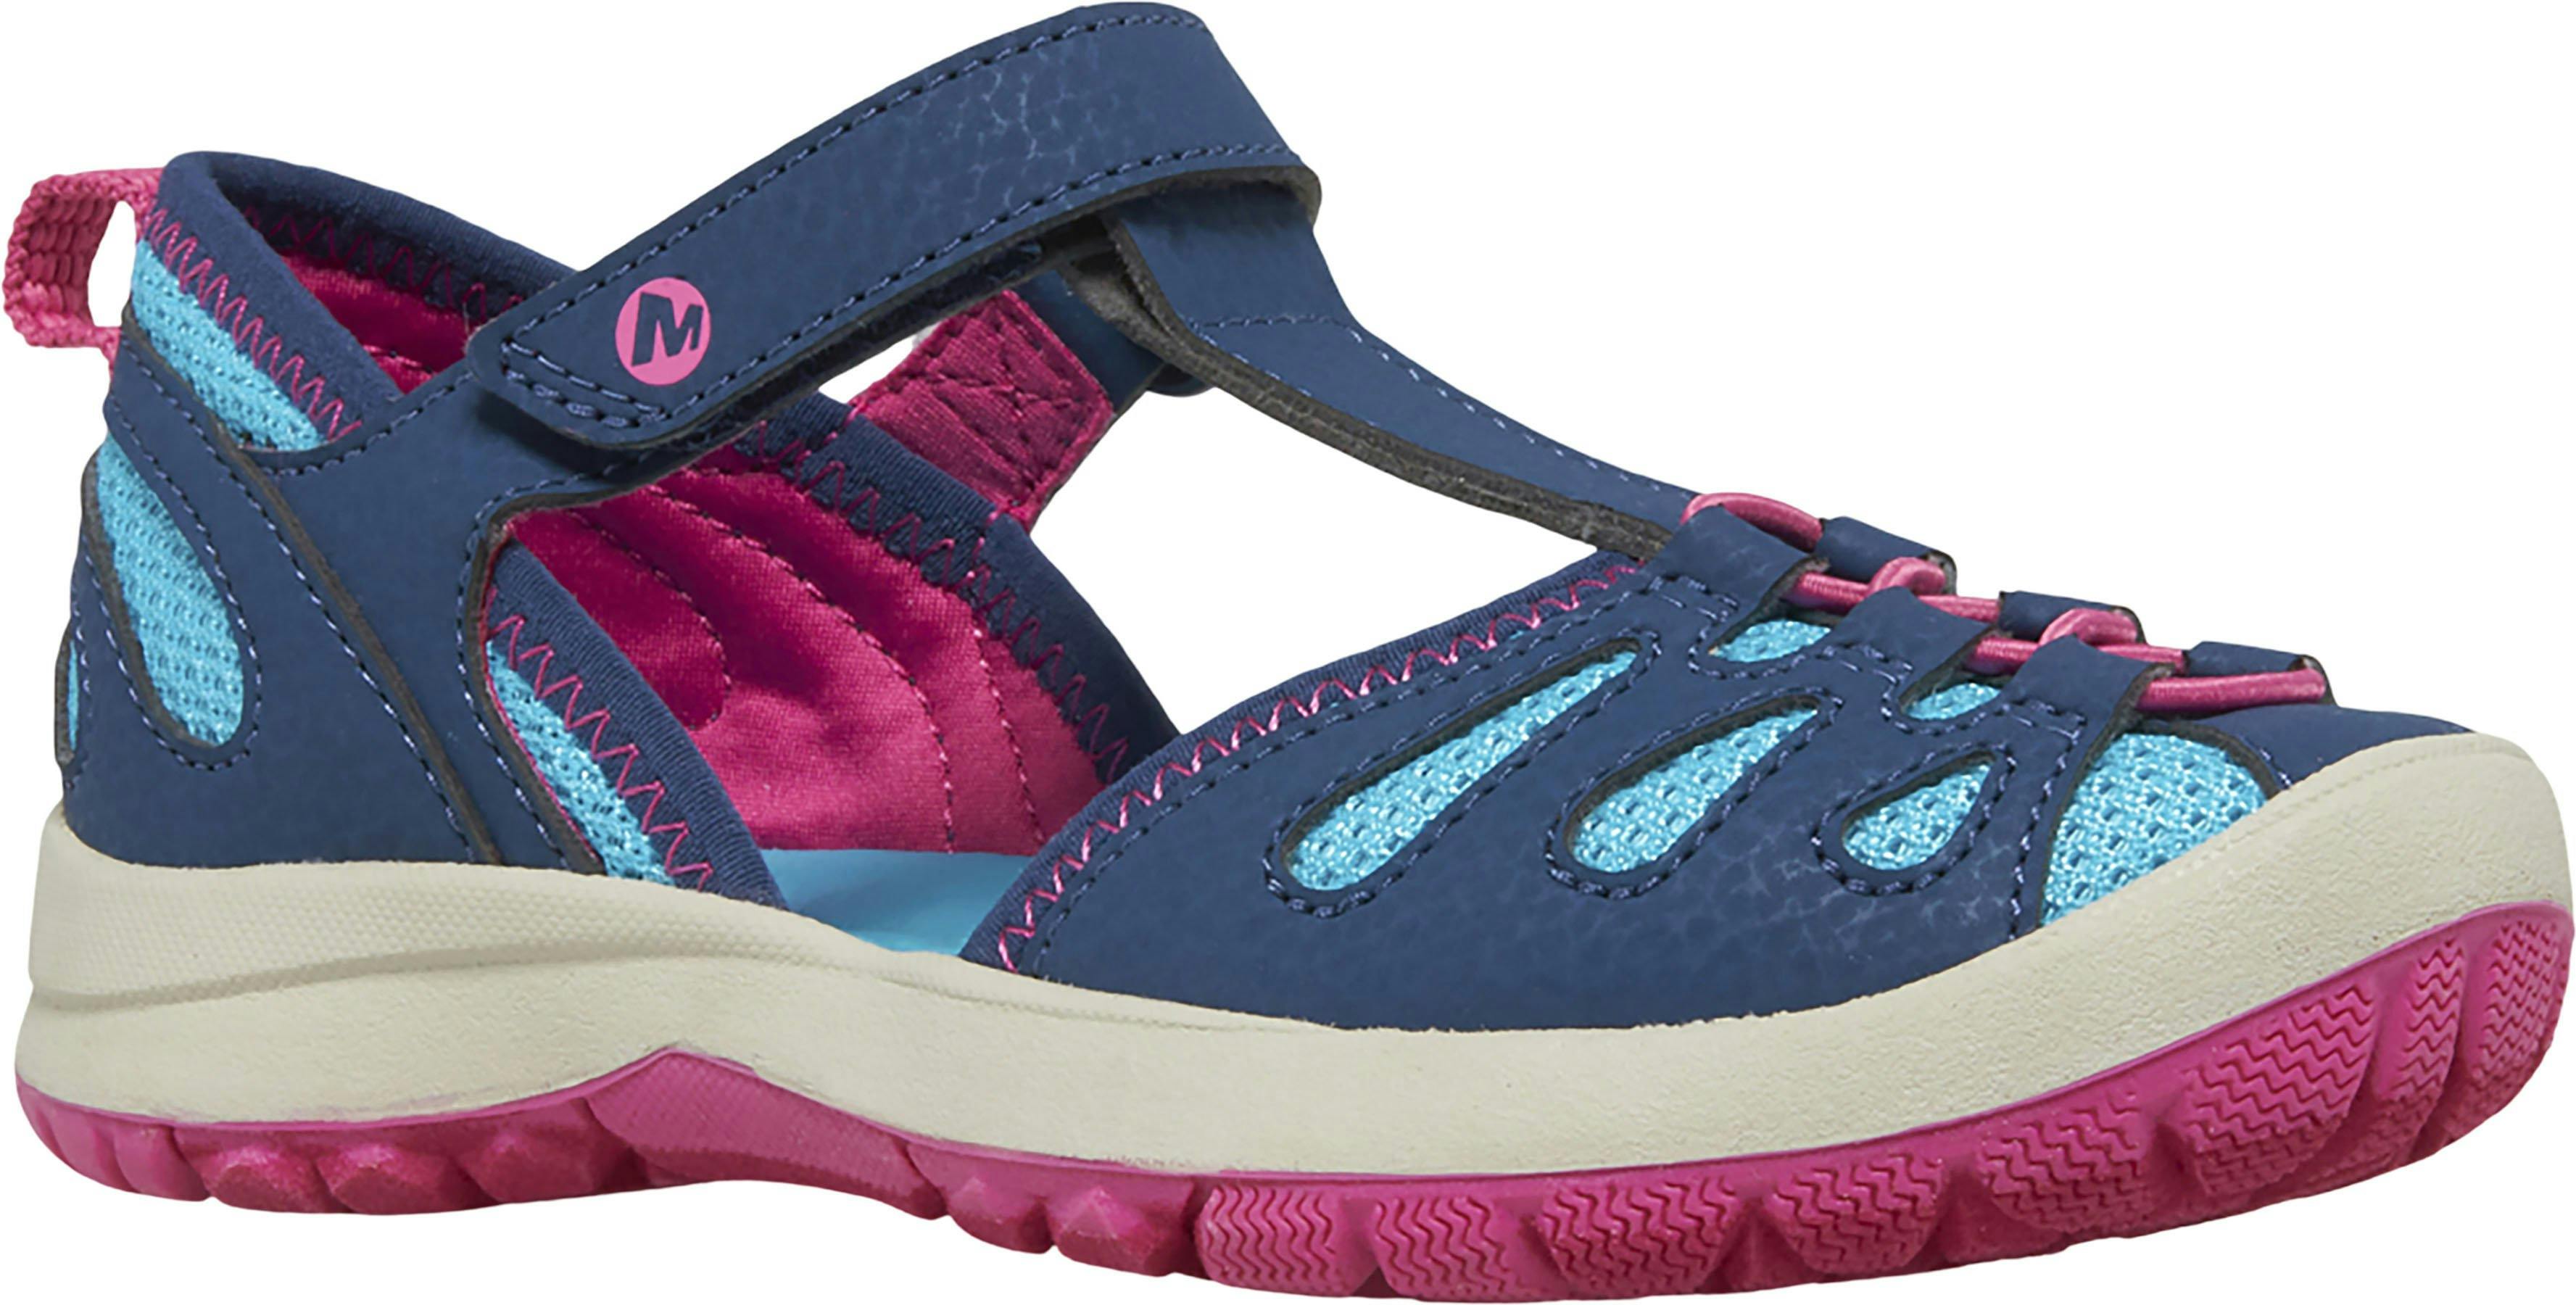 Product image for Hydro Lily Sandals - Girls